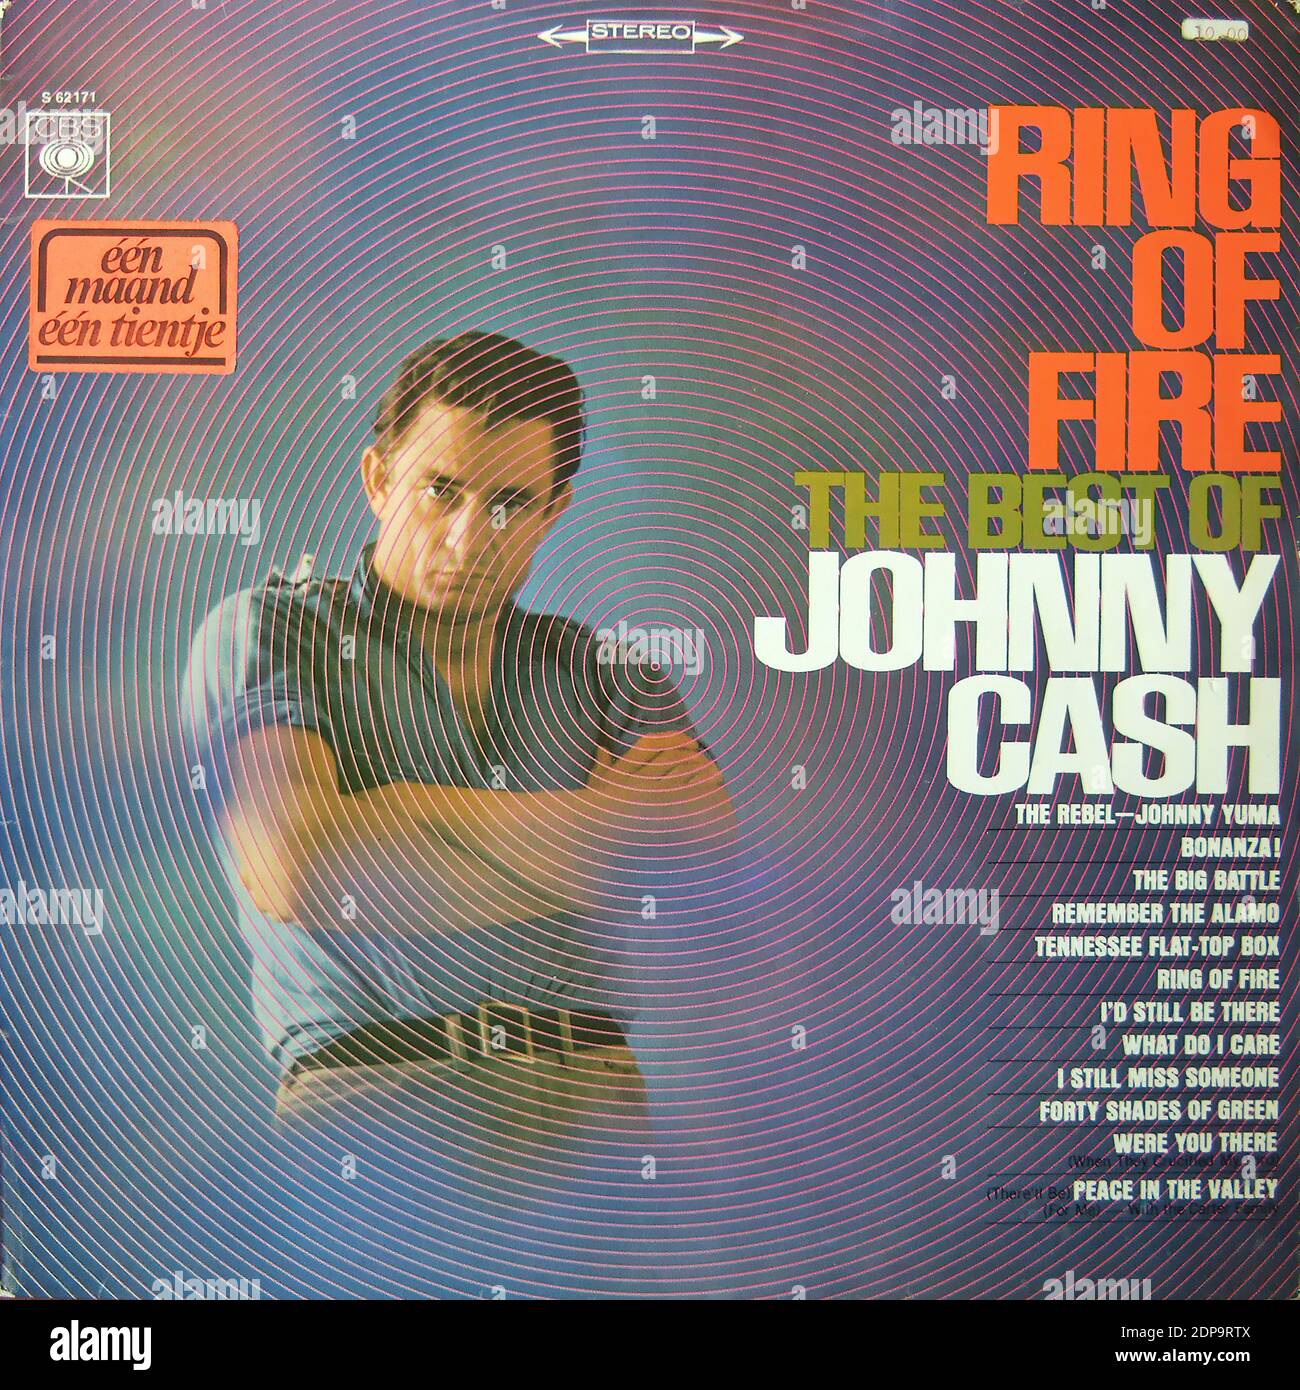 Johnny Cash - Ring of Fire, The Best Of, CBS - Vintage vinyl album cover  Stock Photo - Alamy